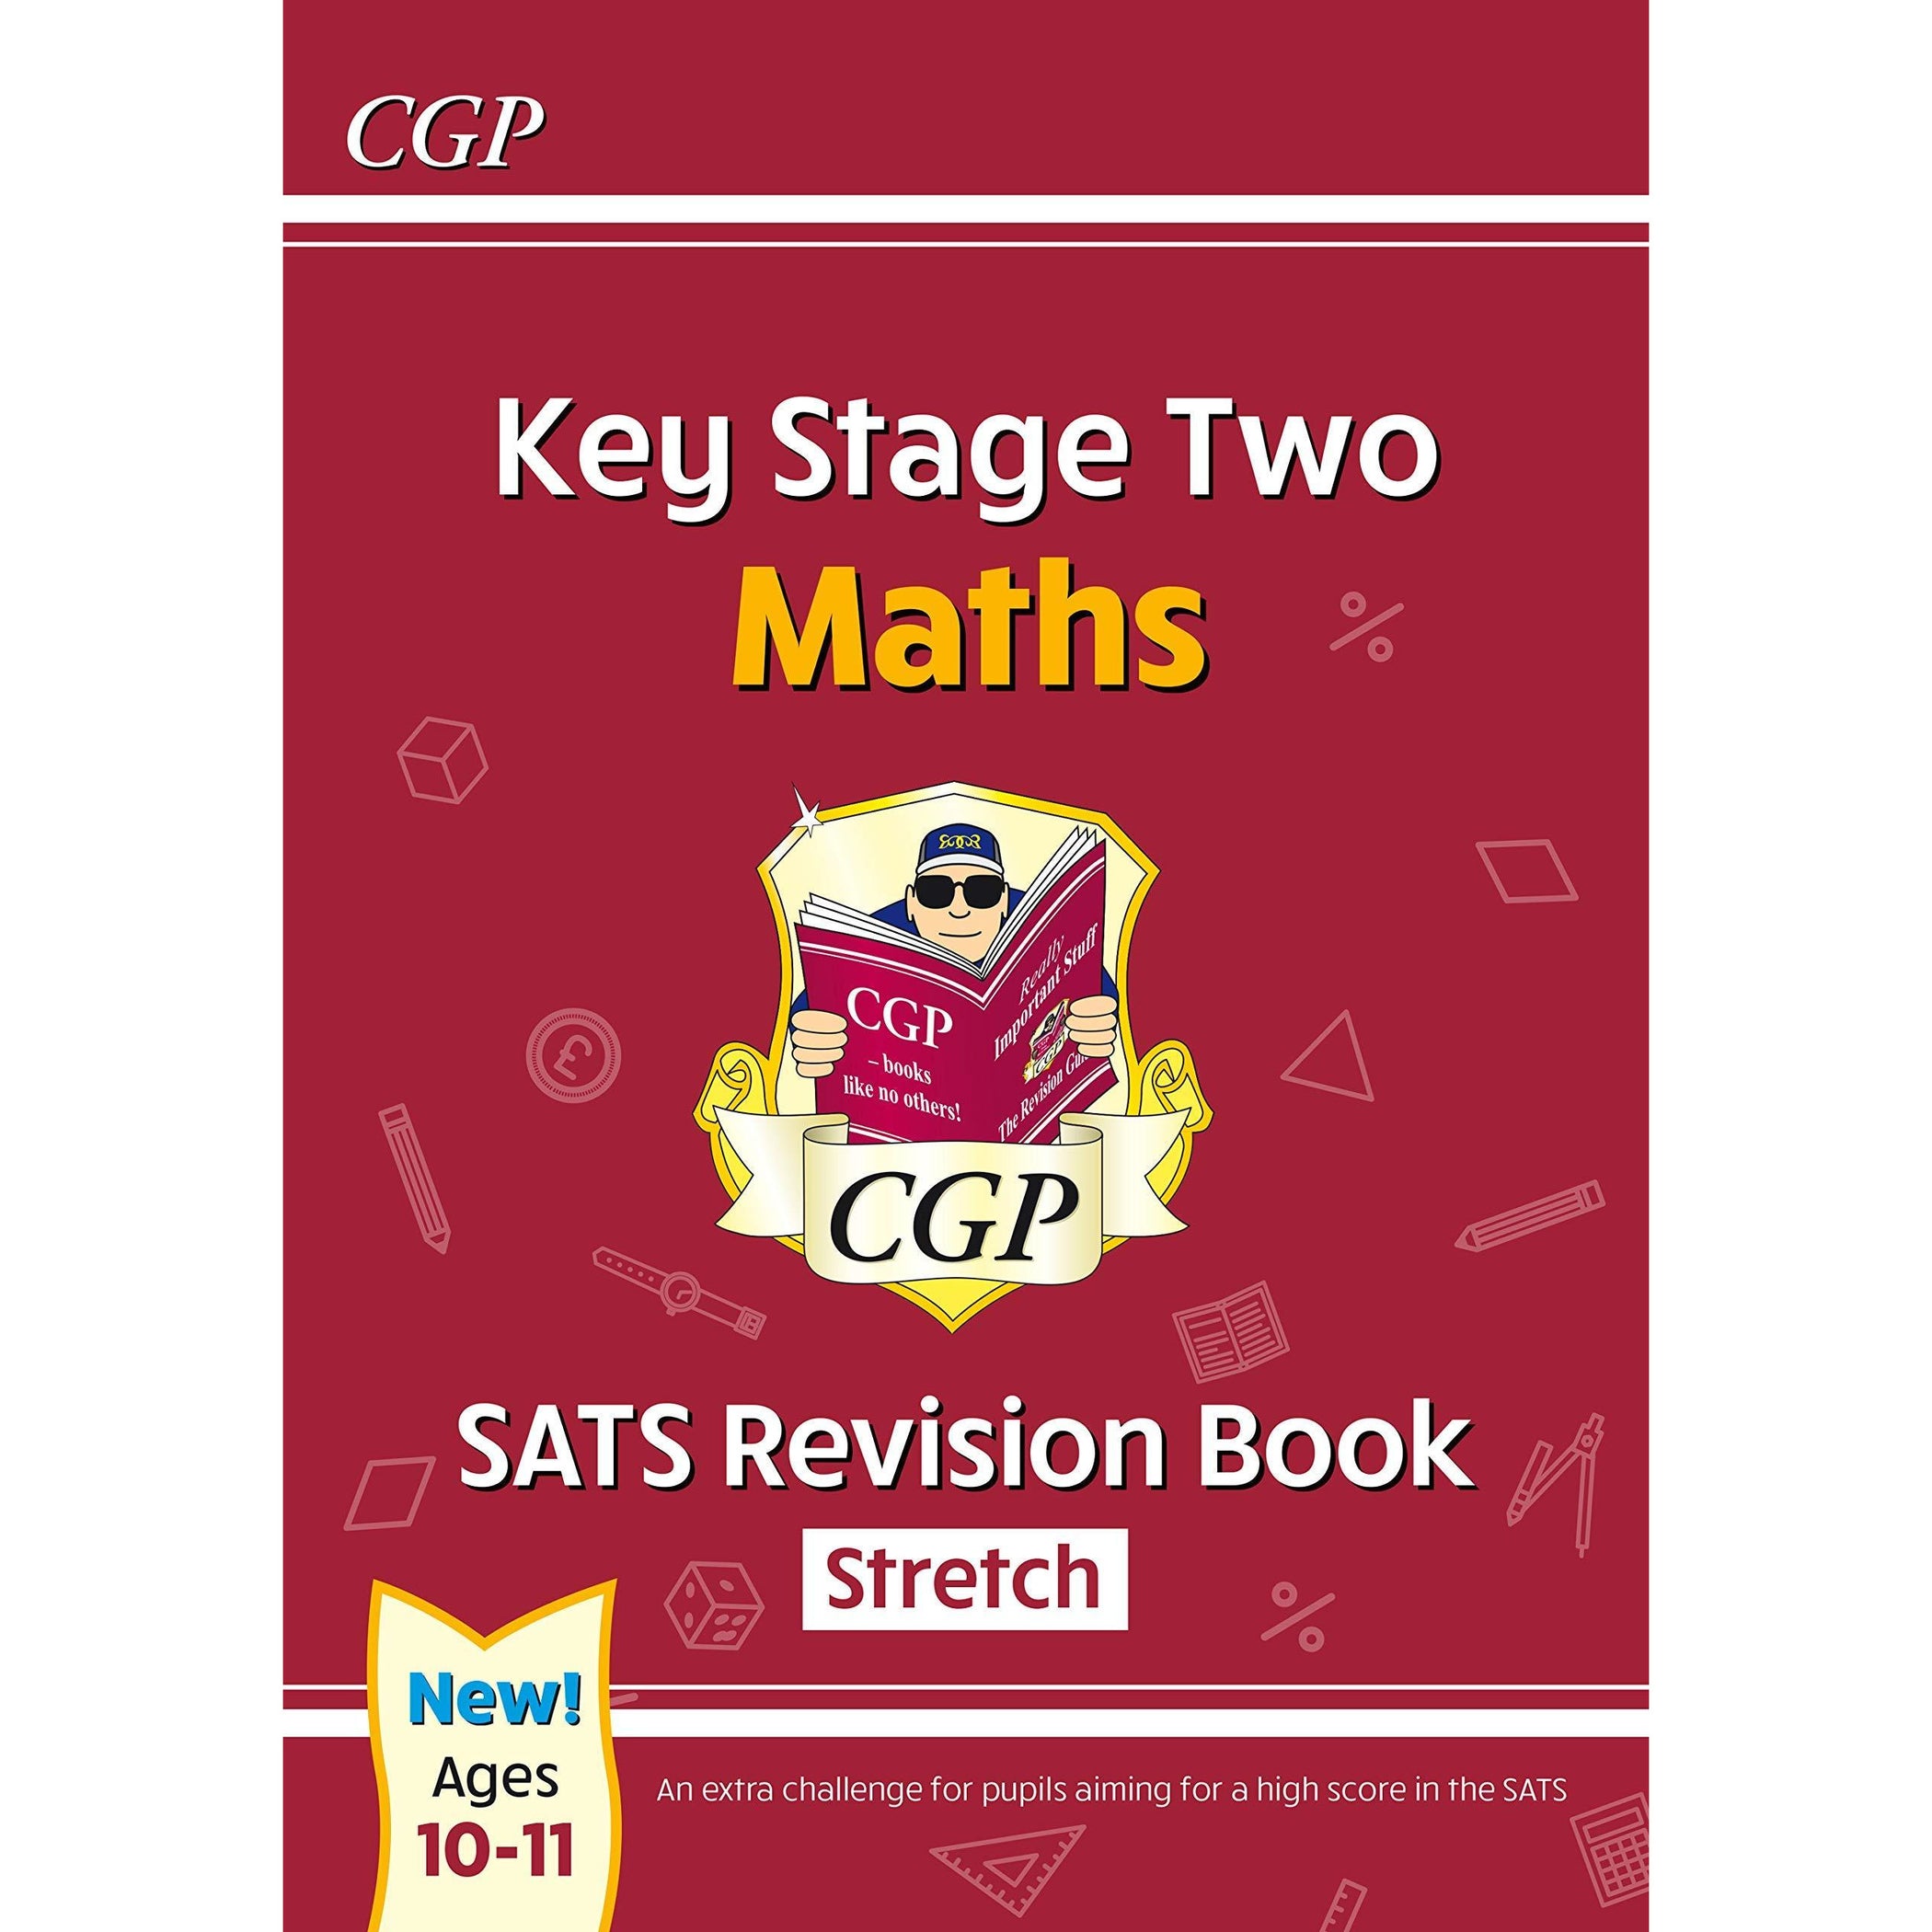 cgp-new-ks2-maths-sats-revision-book-ages-10-11-stretch-for-the-2020-tests-4-books